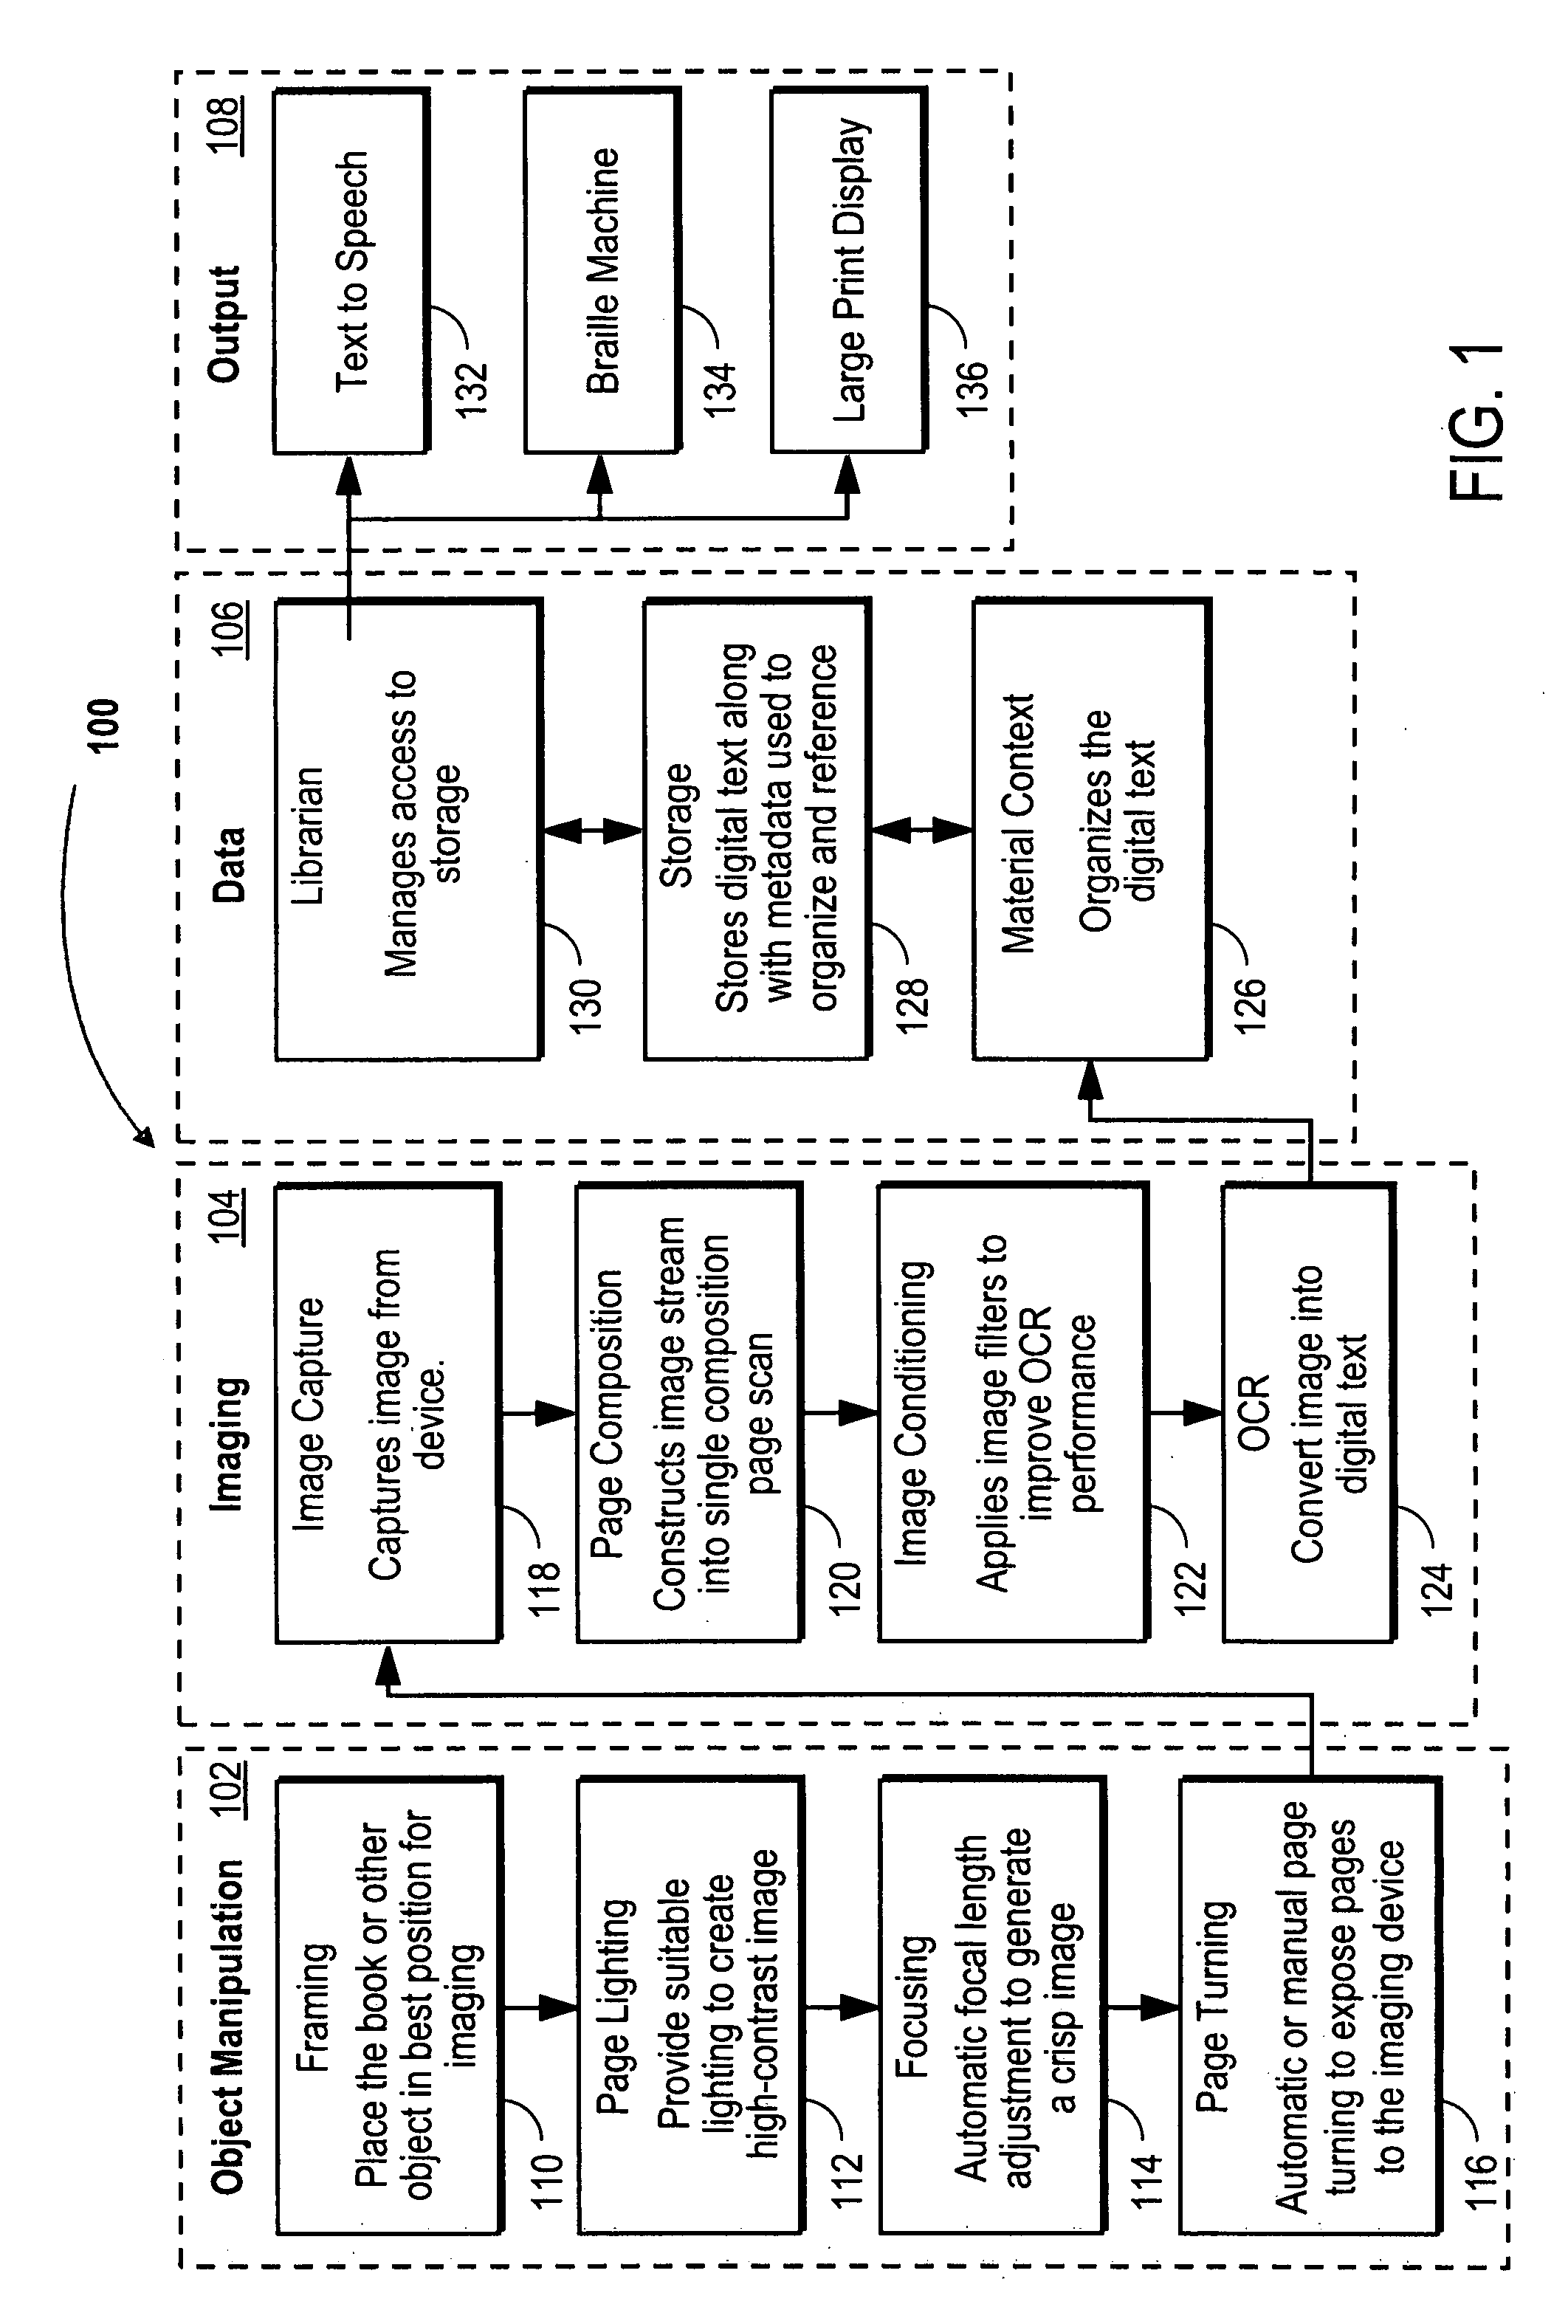 Method for capturing and presenting text while maintaining material context during optical character recognition